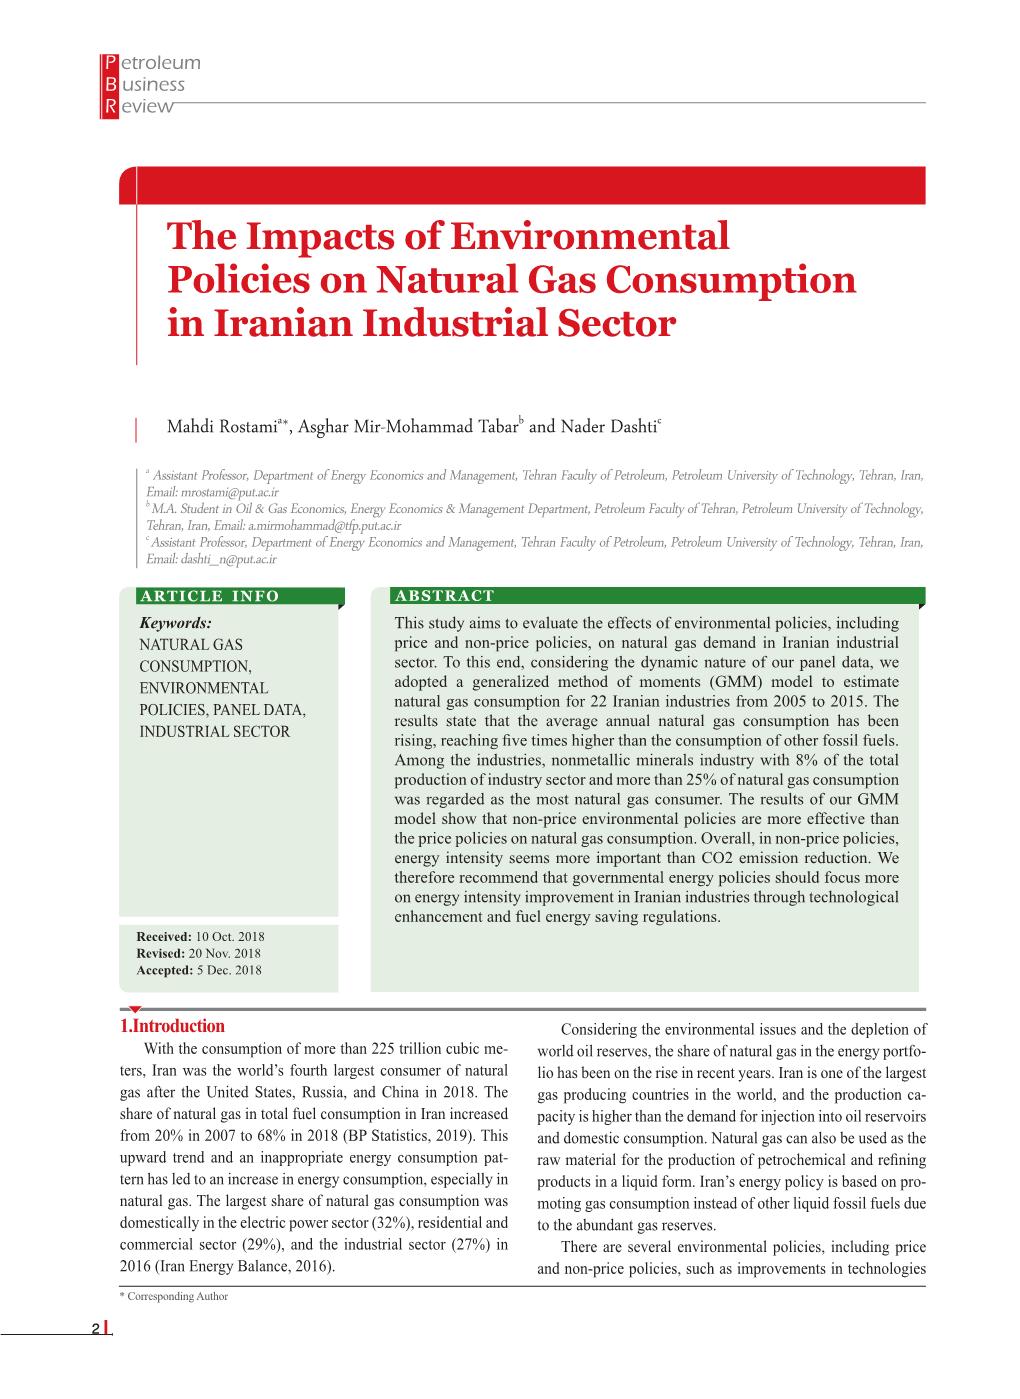 The Impacts of Environmental Policies on Natural Gas Consumption in Iranian Industrial Sector